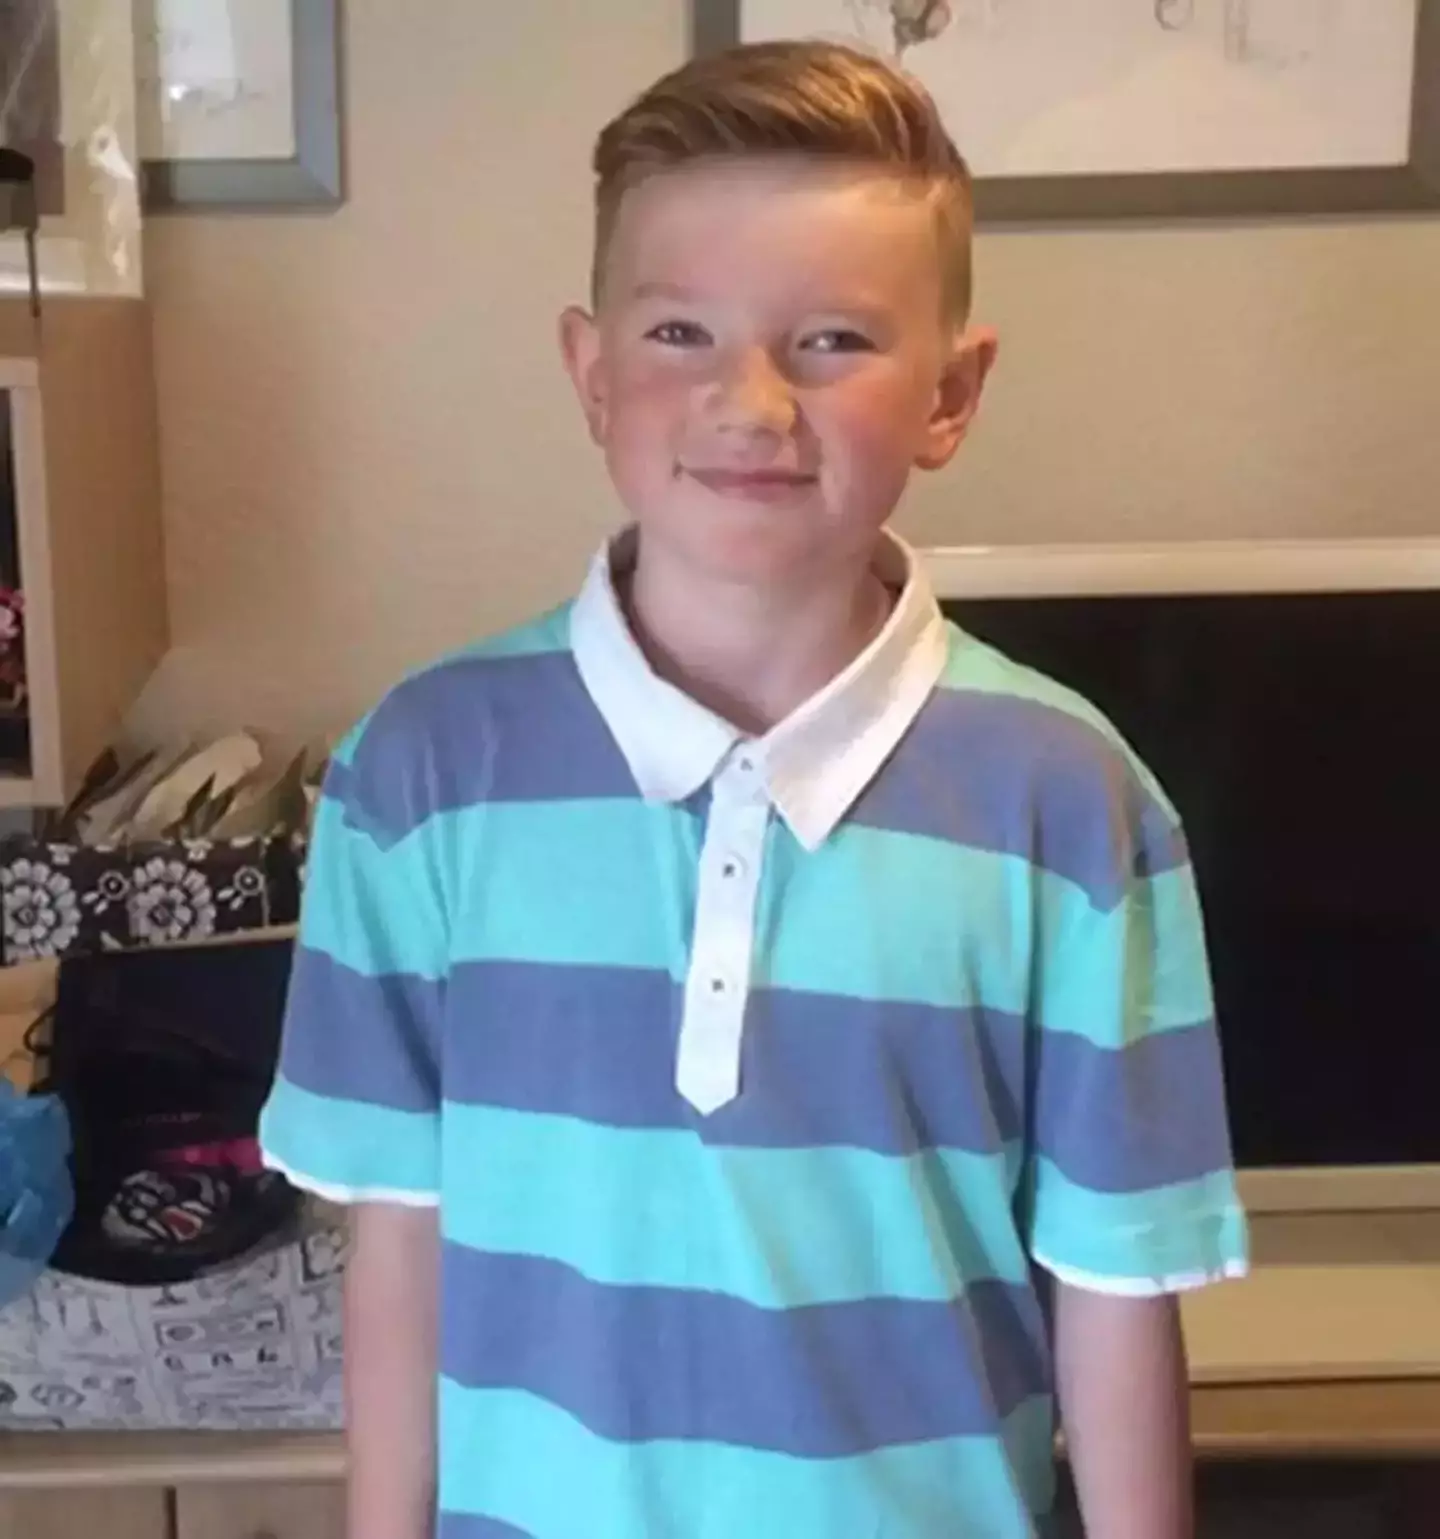 Alex Batty was just 11 when he went missing in Spain in October 2017.